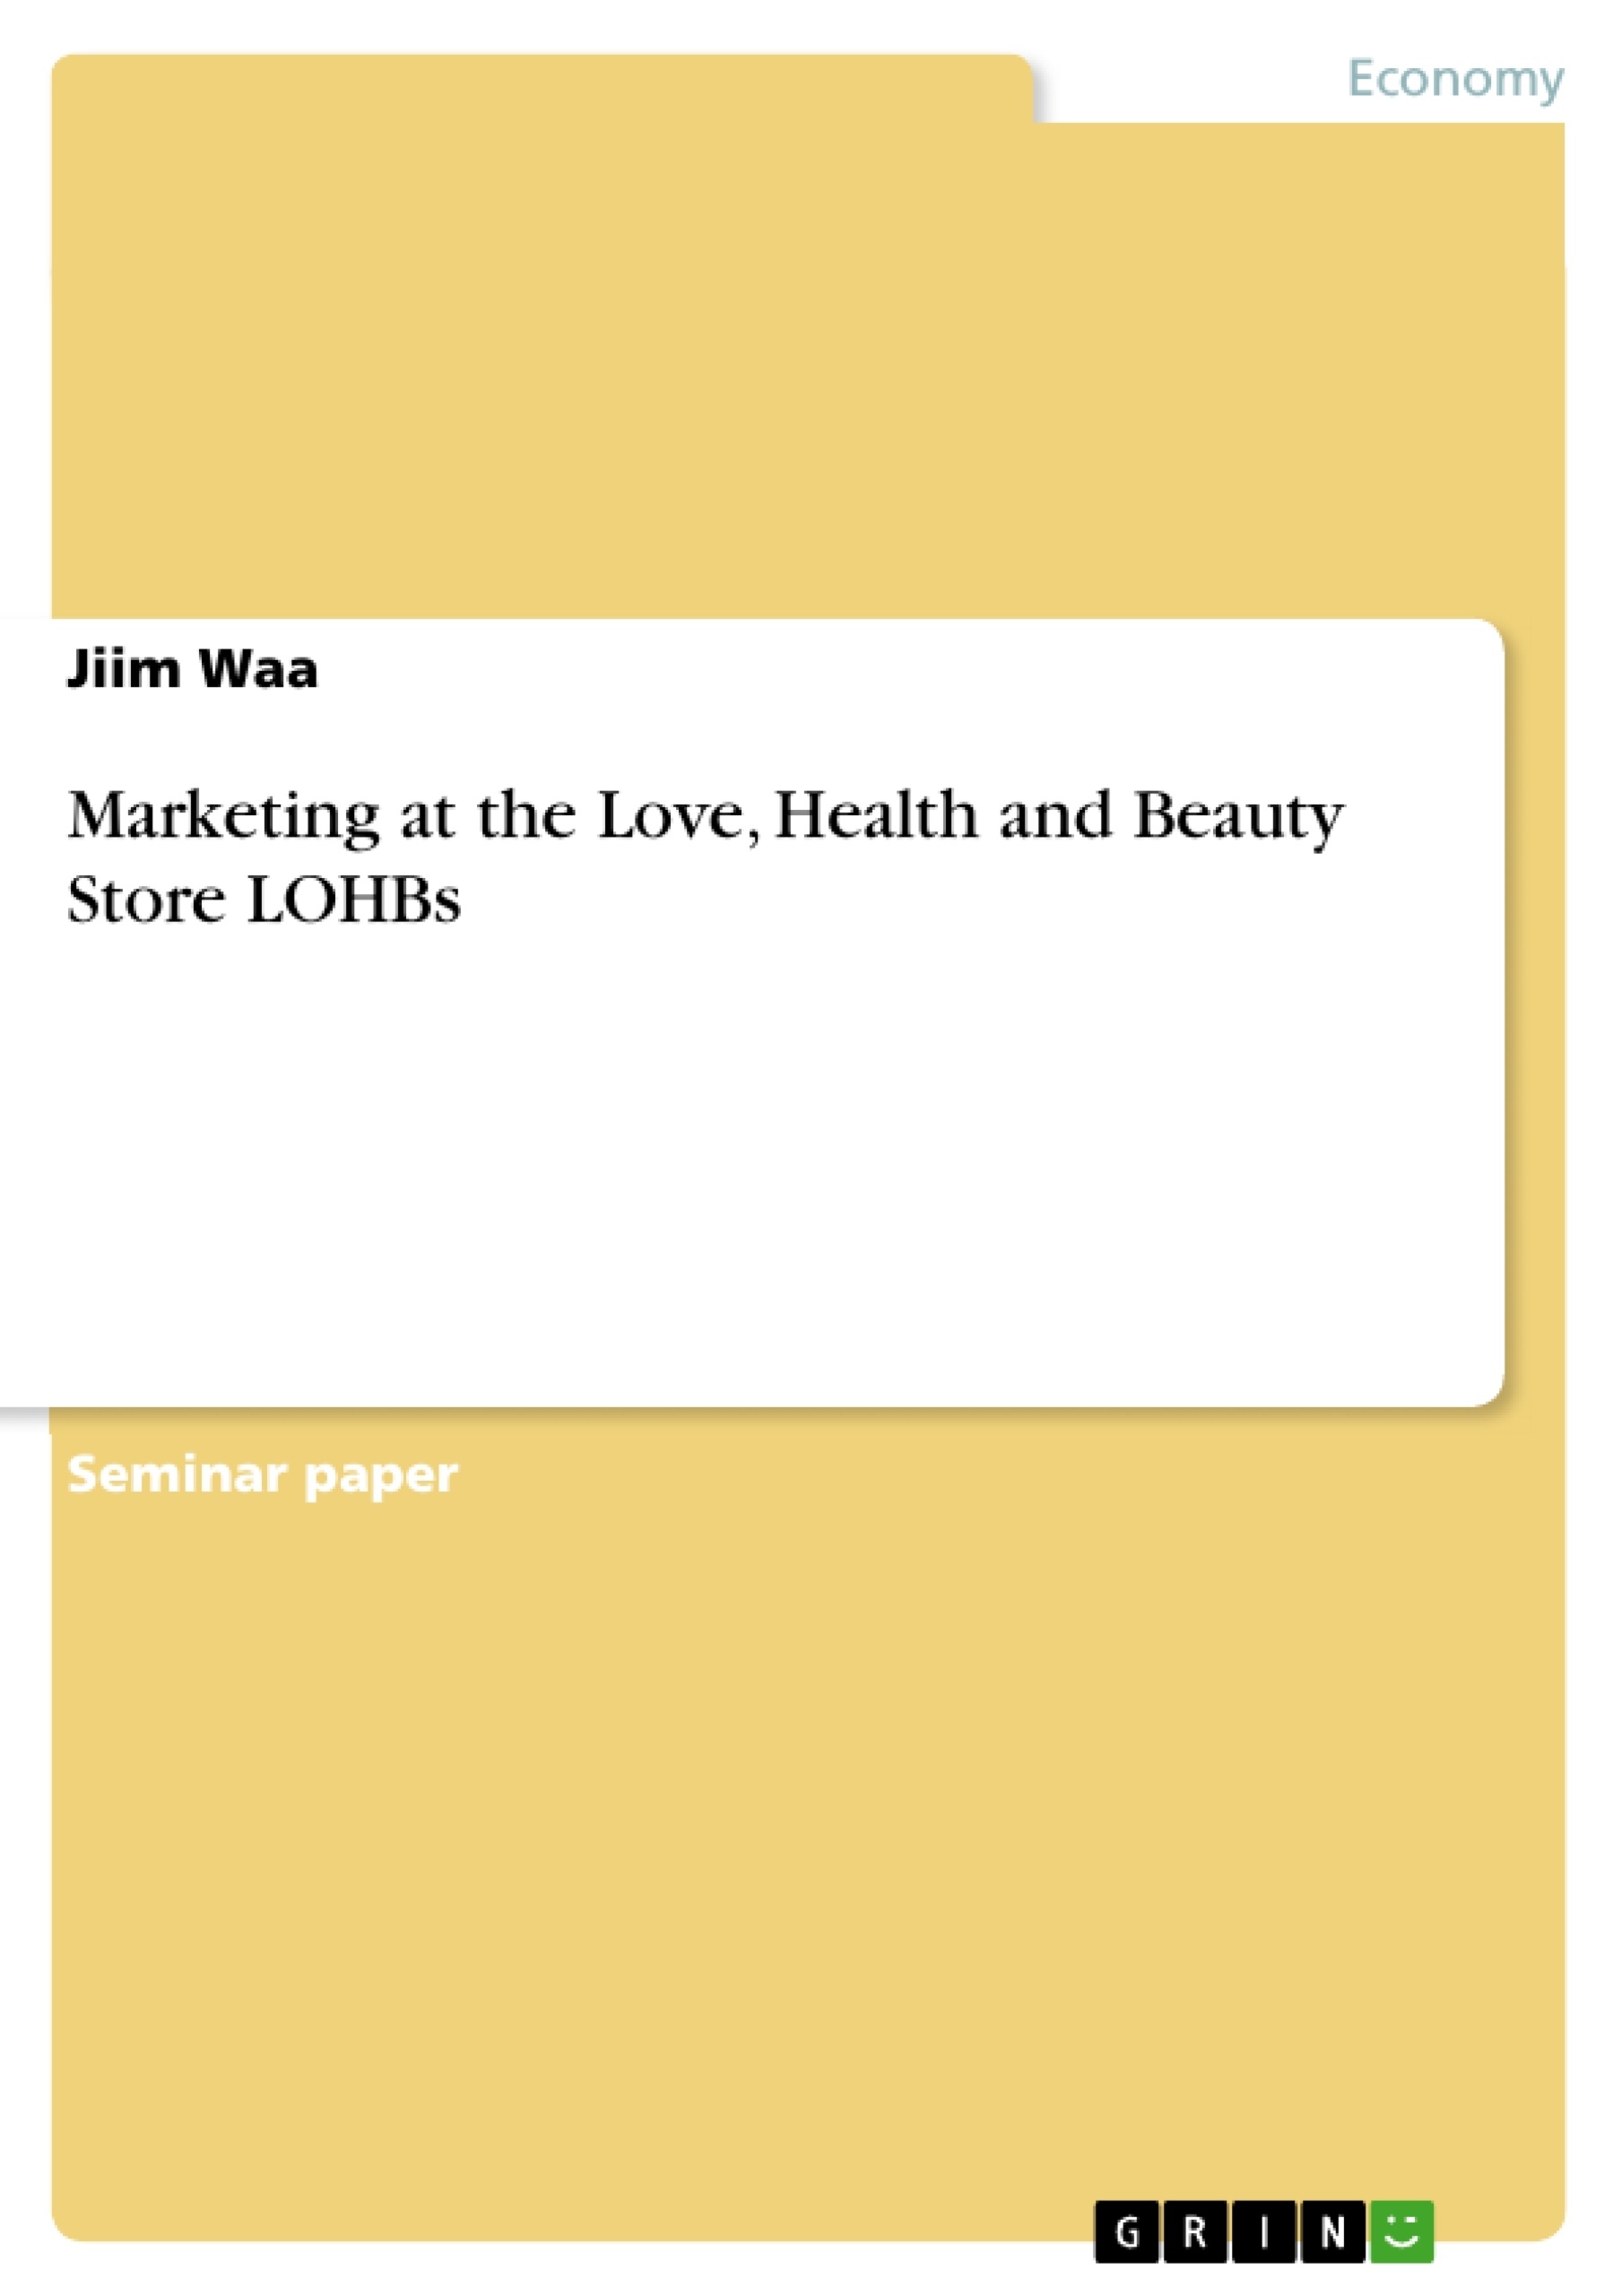 Título: Marketing at the Love, Health and Beauty Store LOHBs